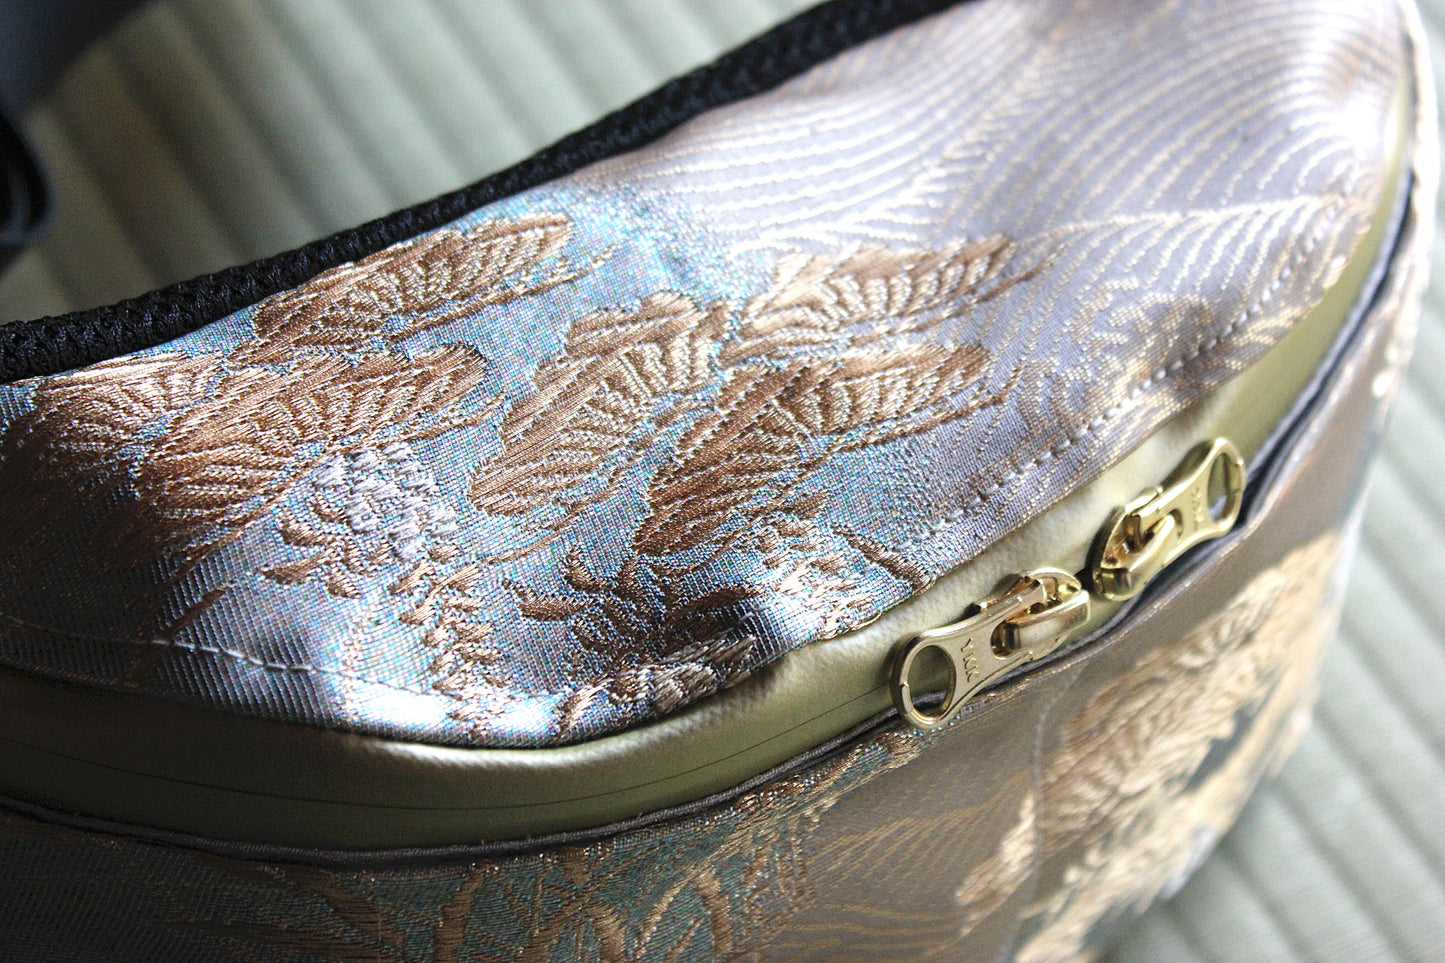 Wisteria & Pearl River bum bag made sustainably handcrafted in Japan from antique kimonos